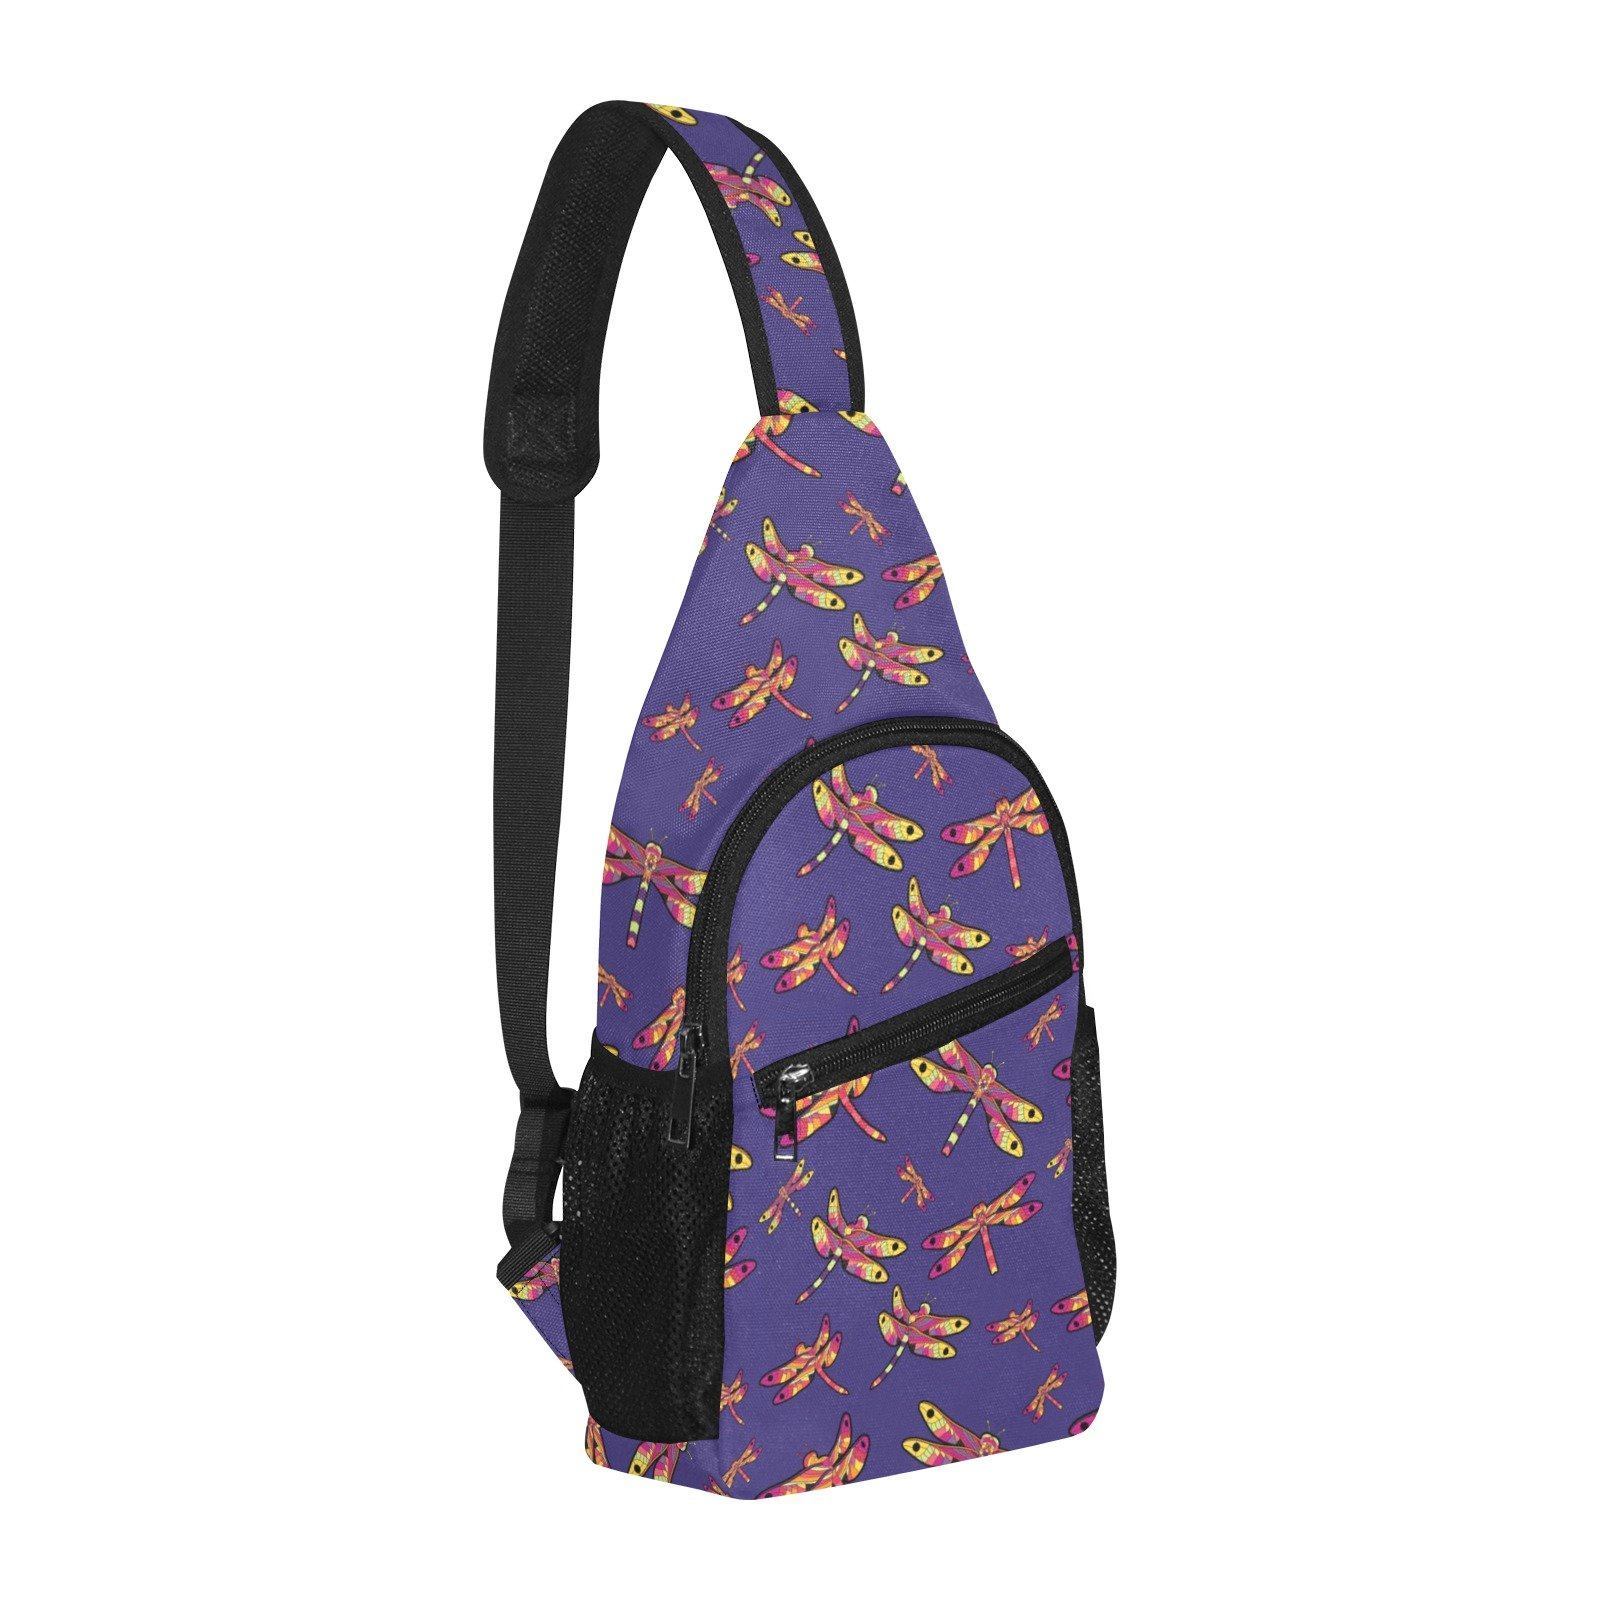 Gathering Purple All Over Print Chest Bag (Model 1719) All Over Print Chest Bag (1719) e-joyer 